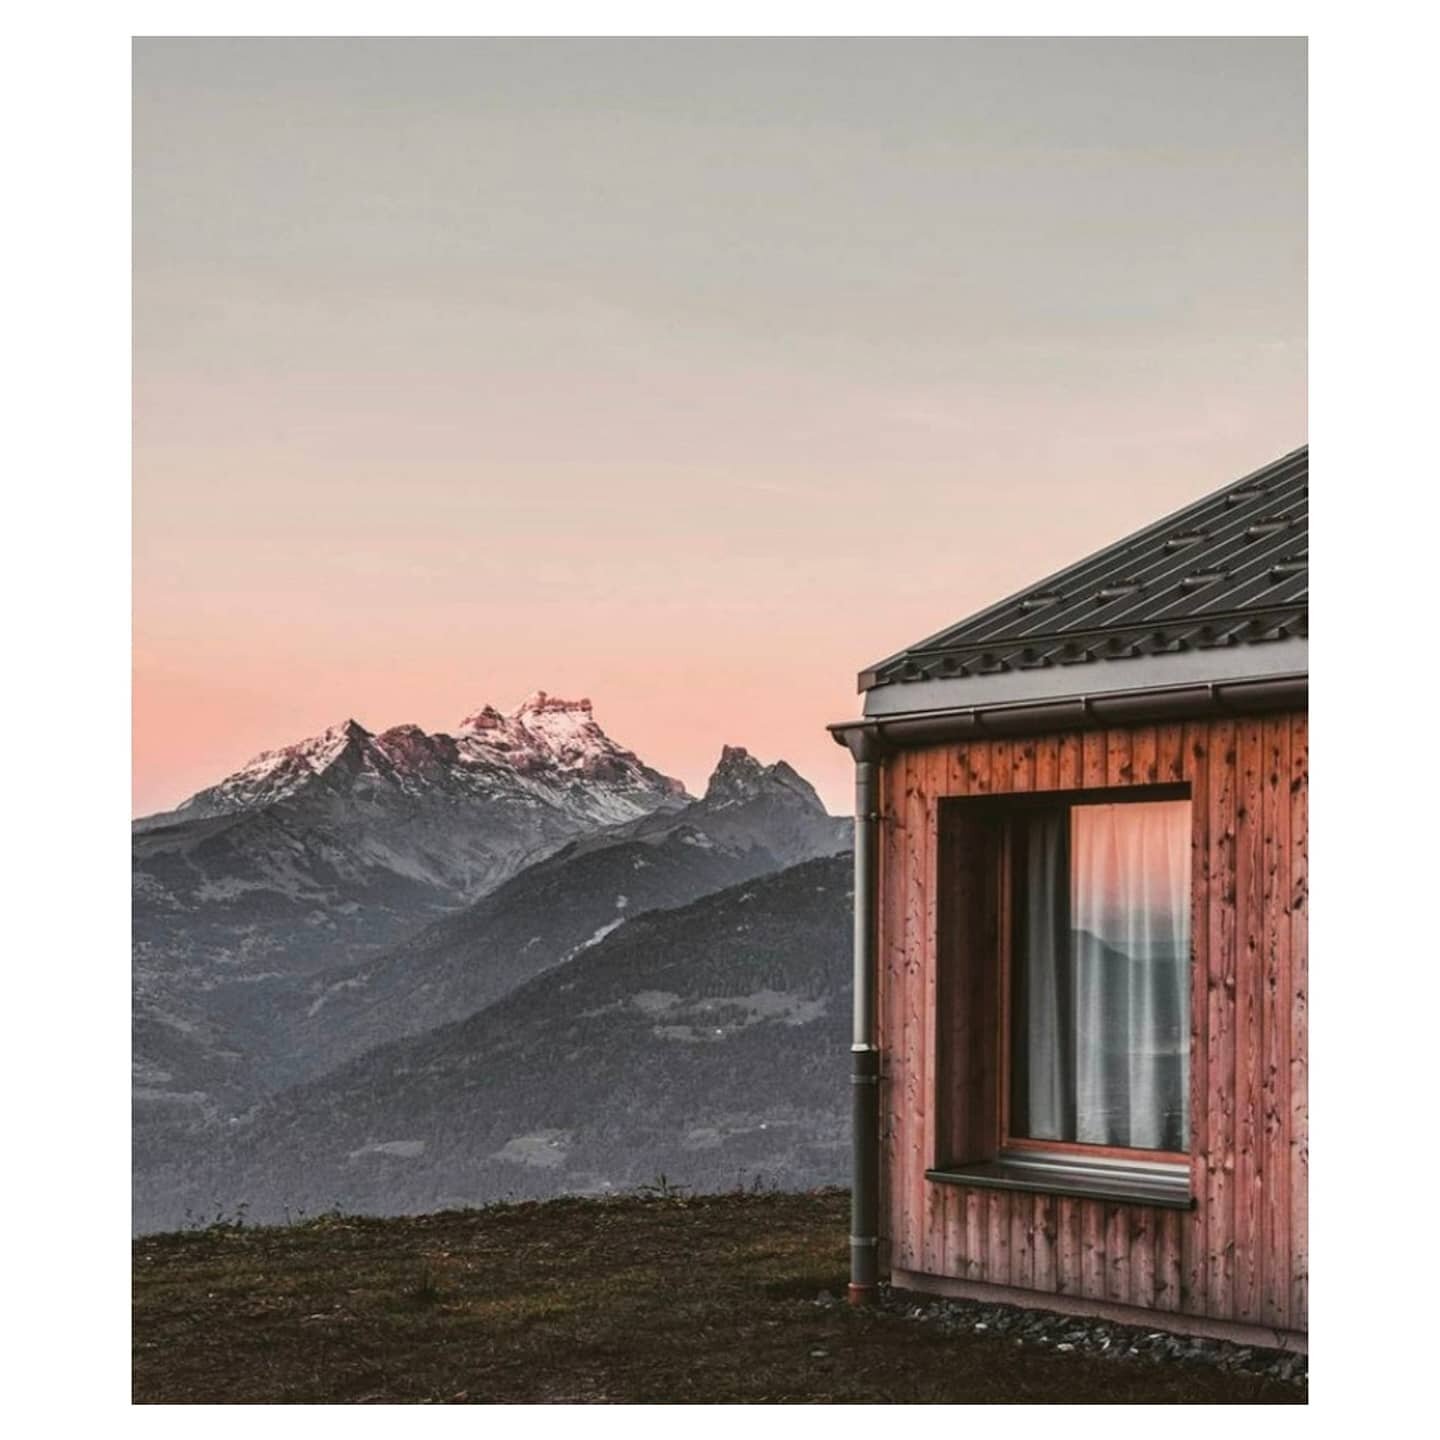 This place! 😍👌 Swipe to see the beautiful views from the studio space...

This is the location for my upcoming 200 hour yoga teacher training 🙆🧘&zwj;♀️🙏. It's nestled in the Swiss Alps and surrounded by nature 🌿⛰🌄.

If taking your YTT is somet